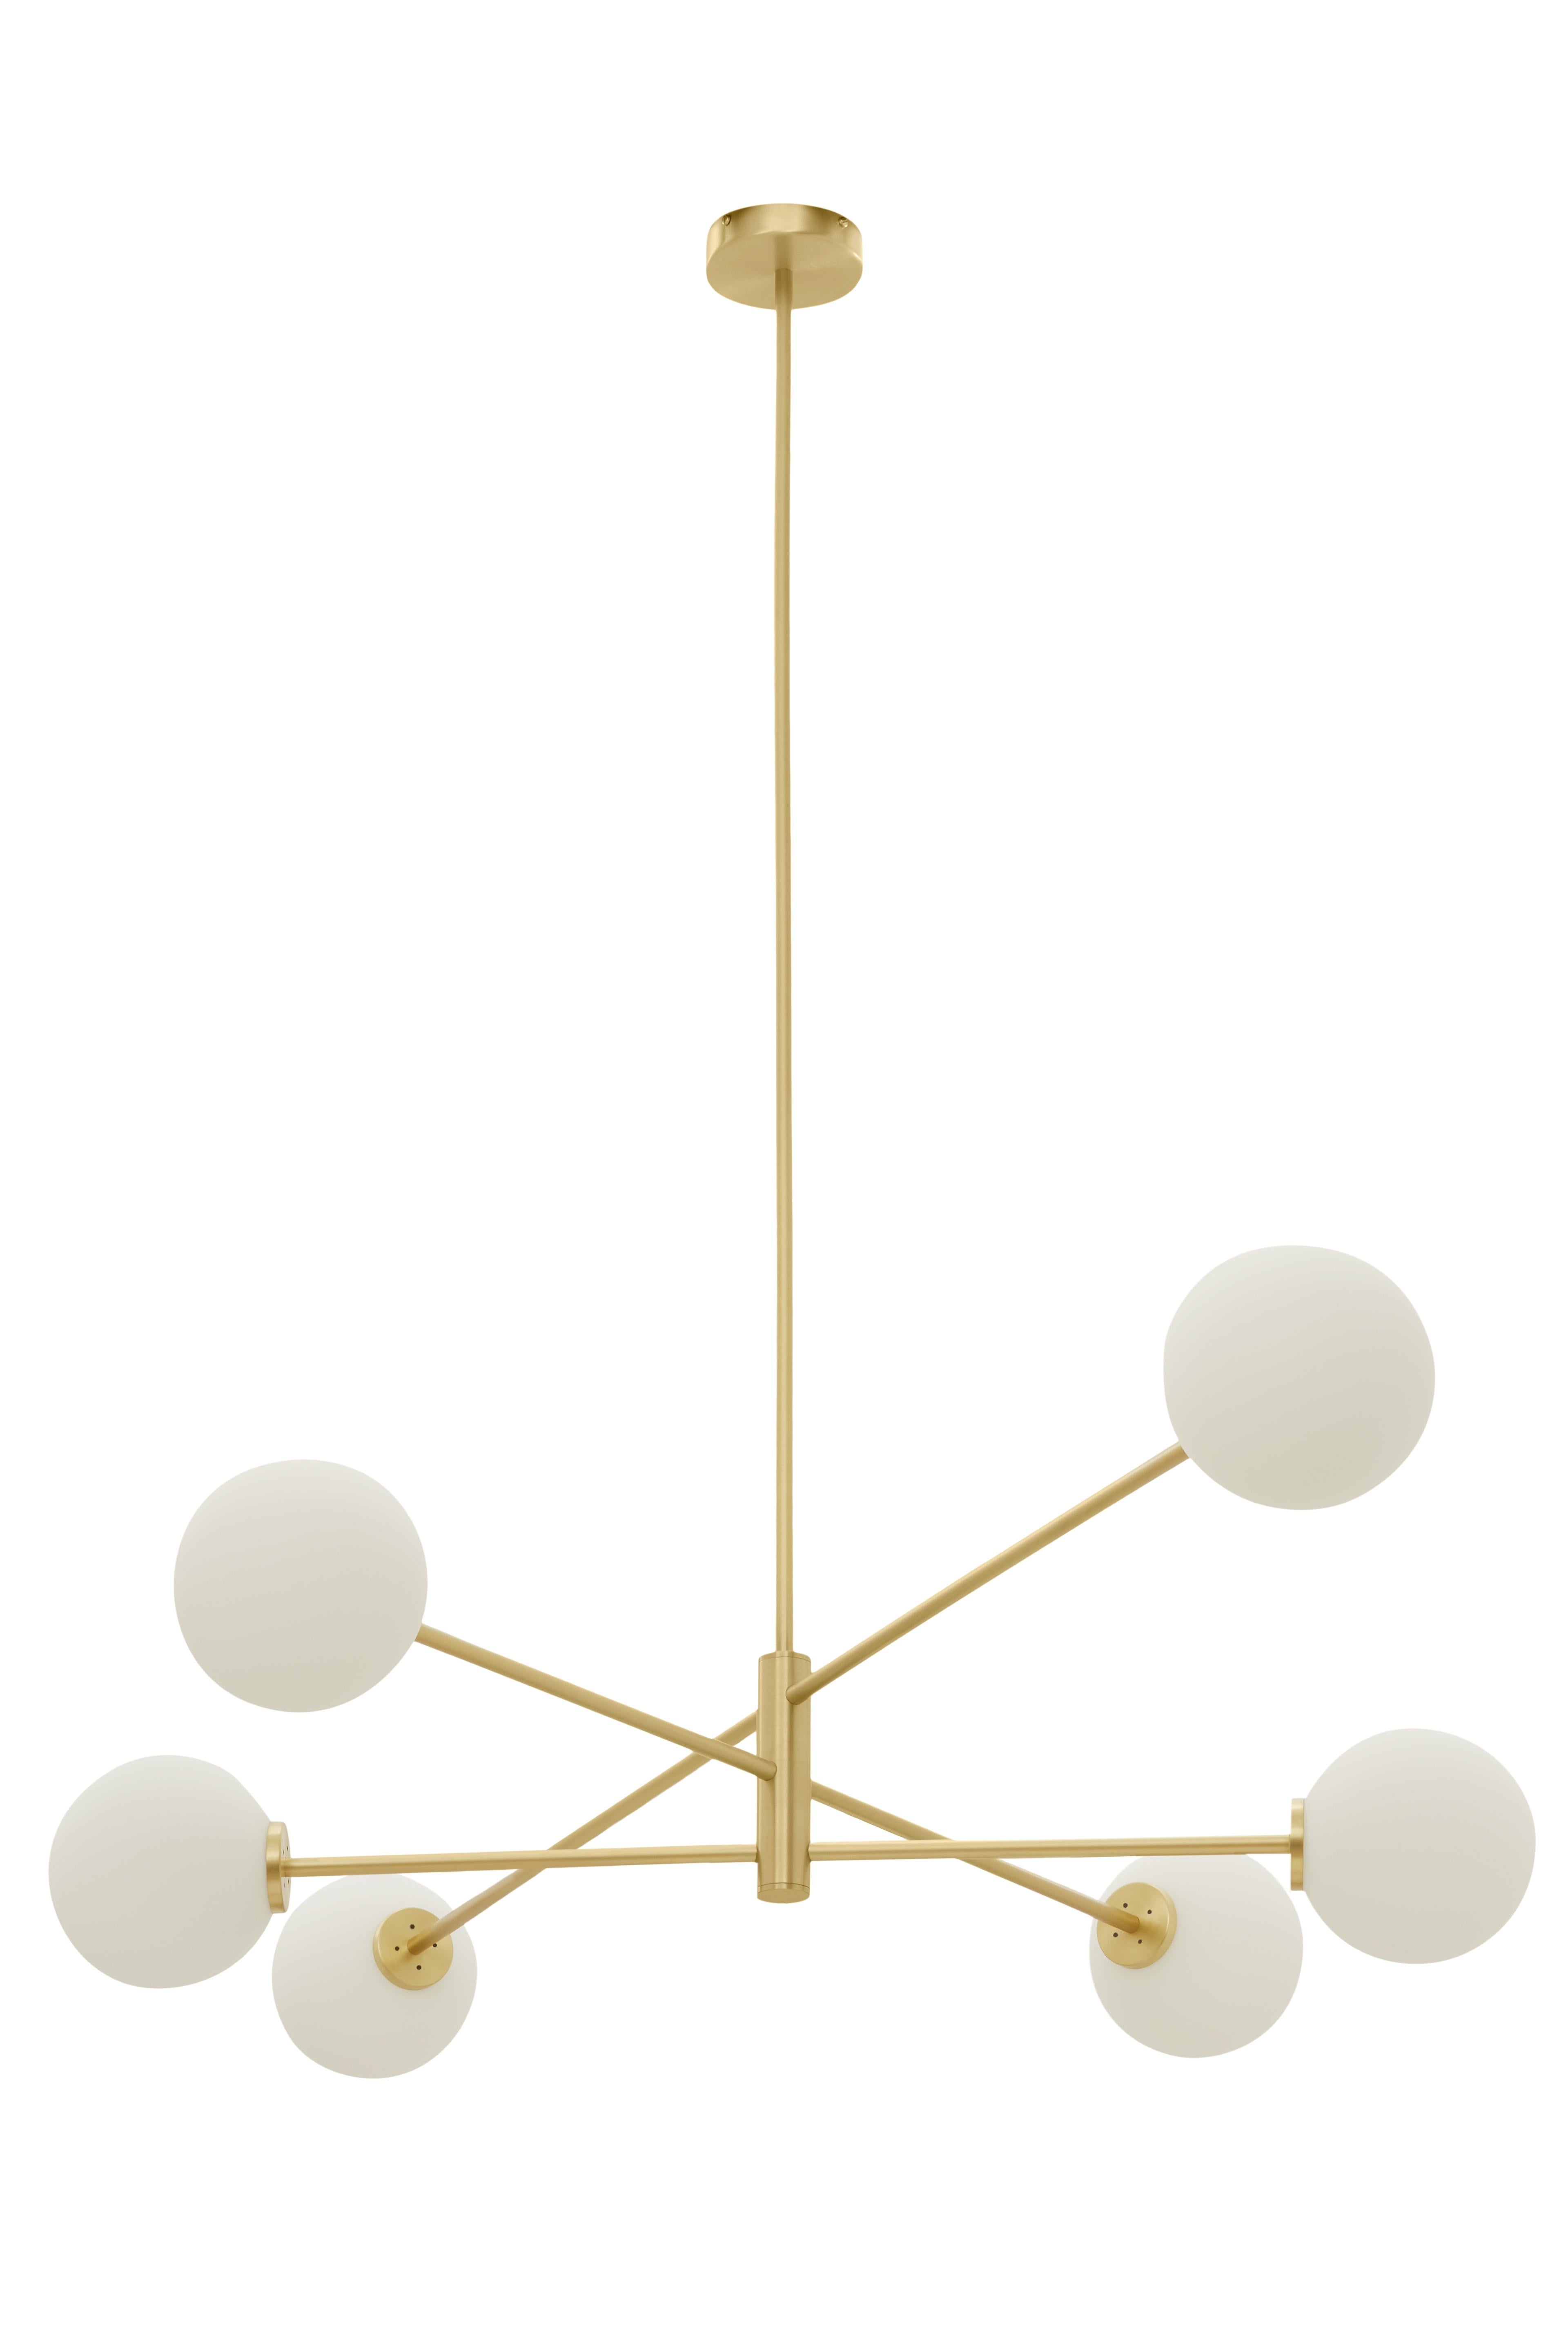 Trevi Six Pendant by CTO Lighting
Materials: satin brass with matt opal glass shades
Also available in dark bronze with matt opal glass shades

Dimensions: H 25 x W 154 cm 

All our lamps can be wired according to each country. If sold to the